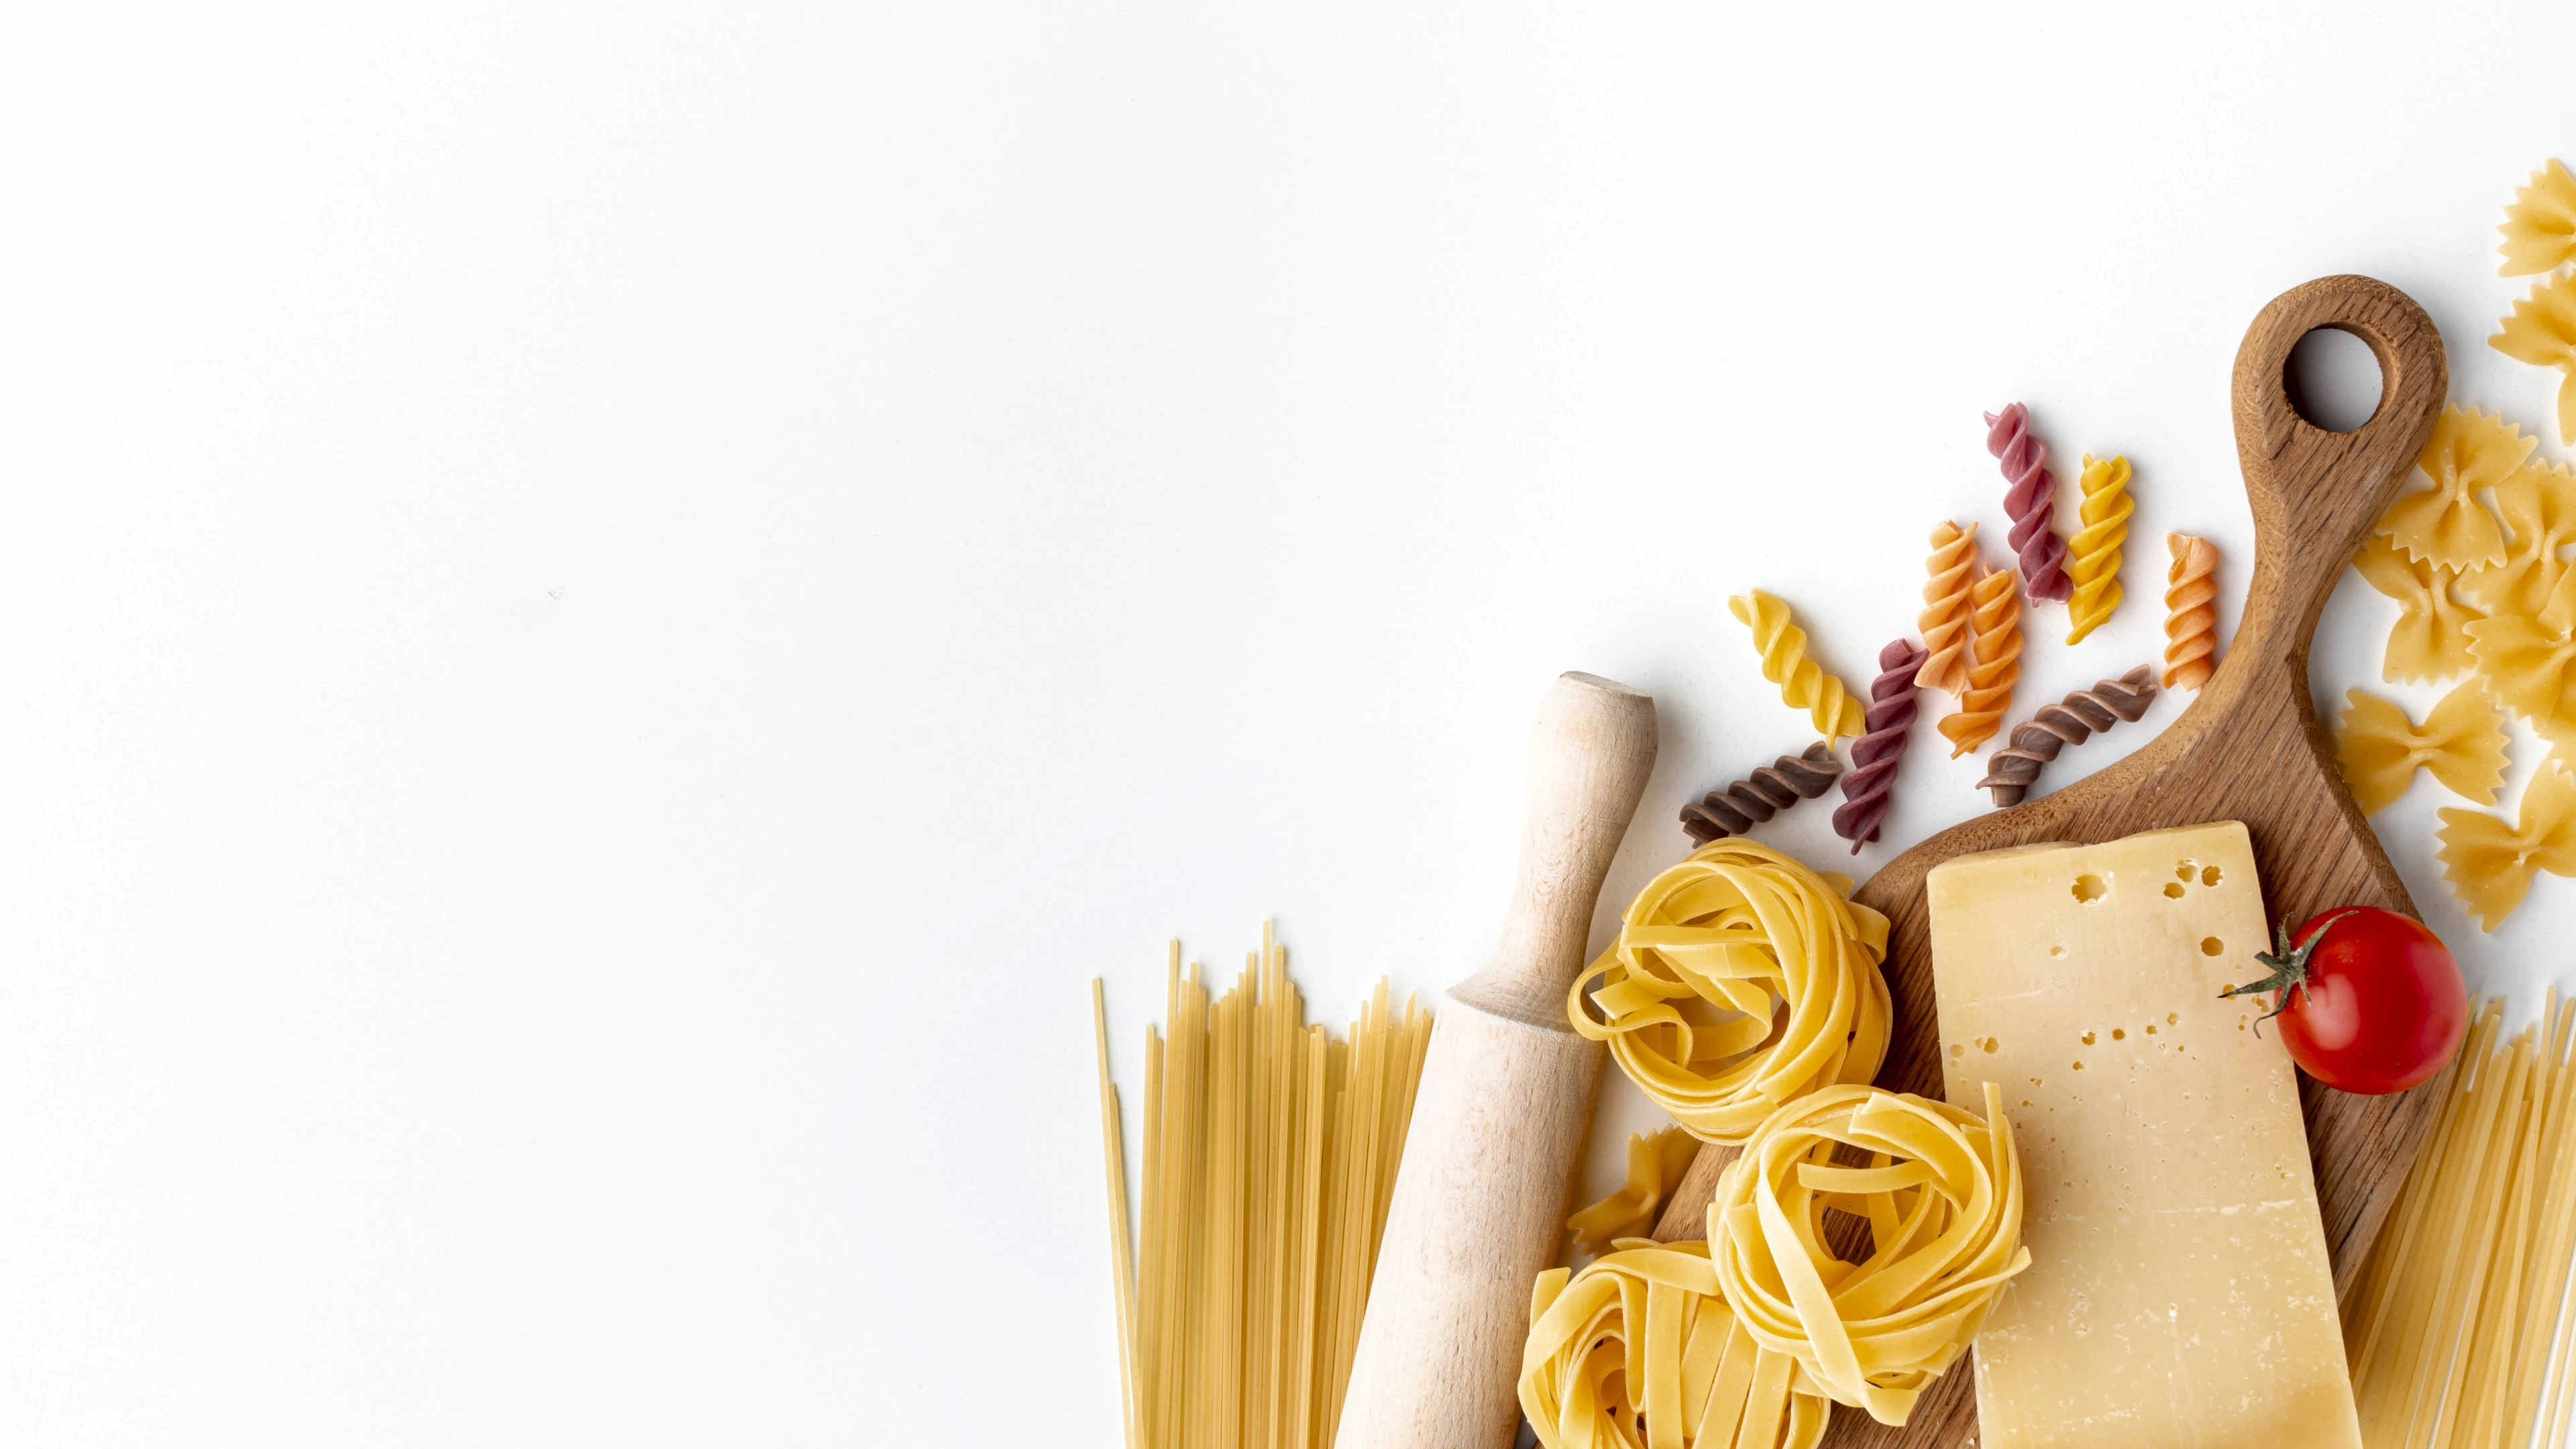 Mix of uncooked pasta and hard cheese on white background